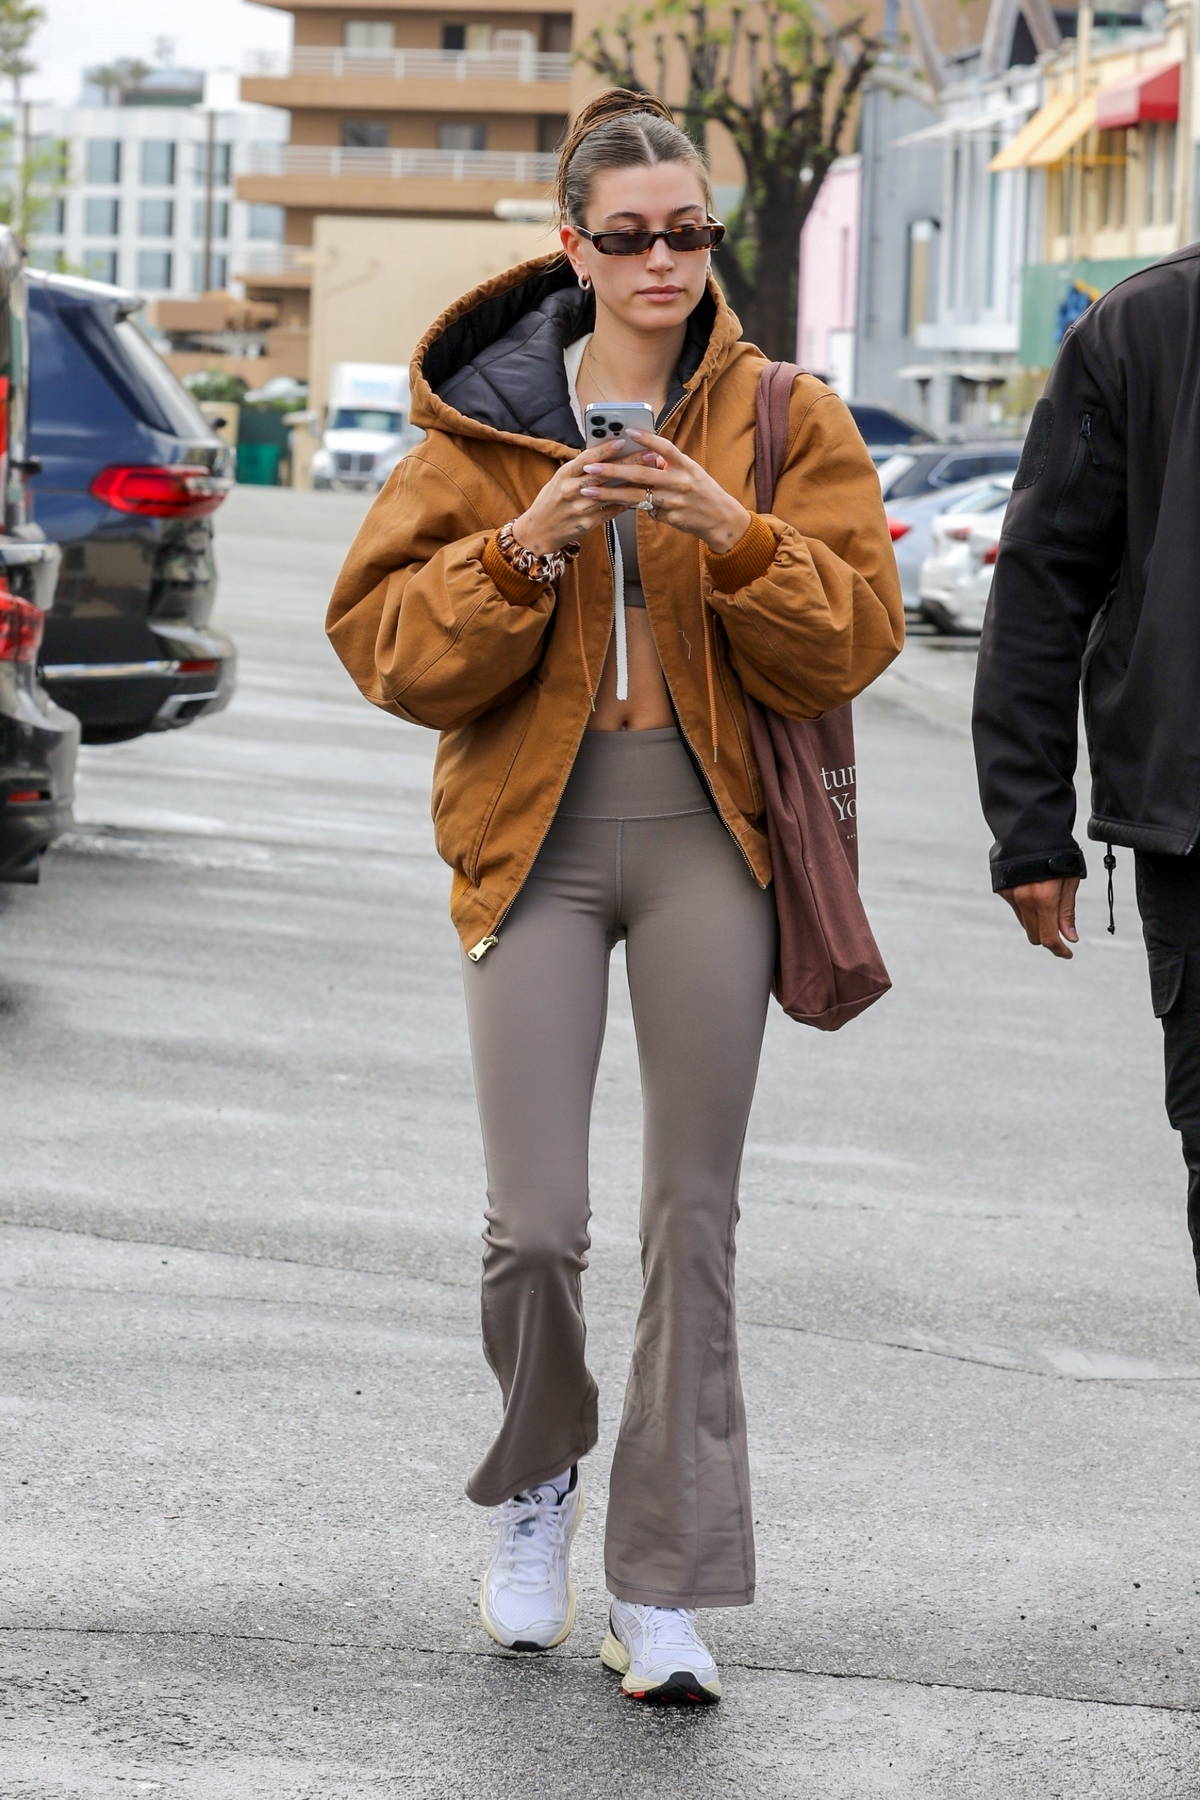 https://www.celebsfirst.com/wp-content/uploads/2023/01/hailey-bieber-rocks-a-tan-jacket-and-flared-leggings-for-a-hot-yoga-session-in-west-hollywood-california-050123_4.jpg